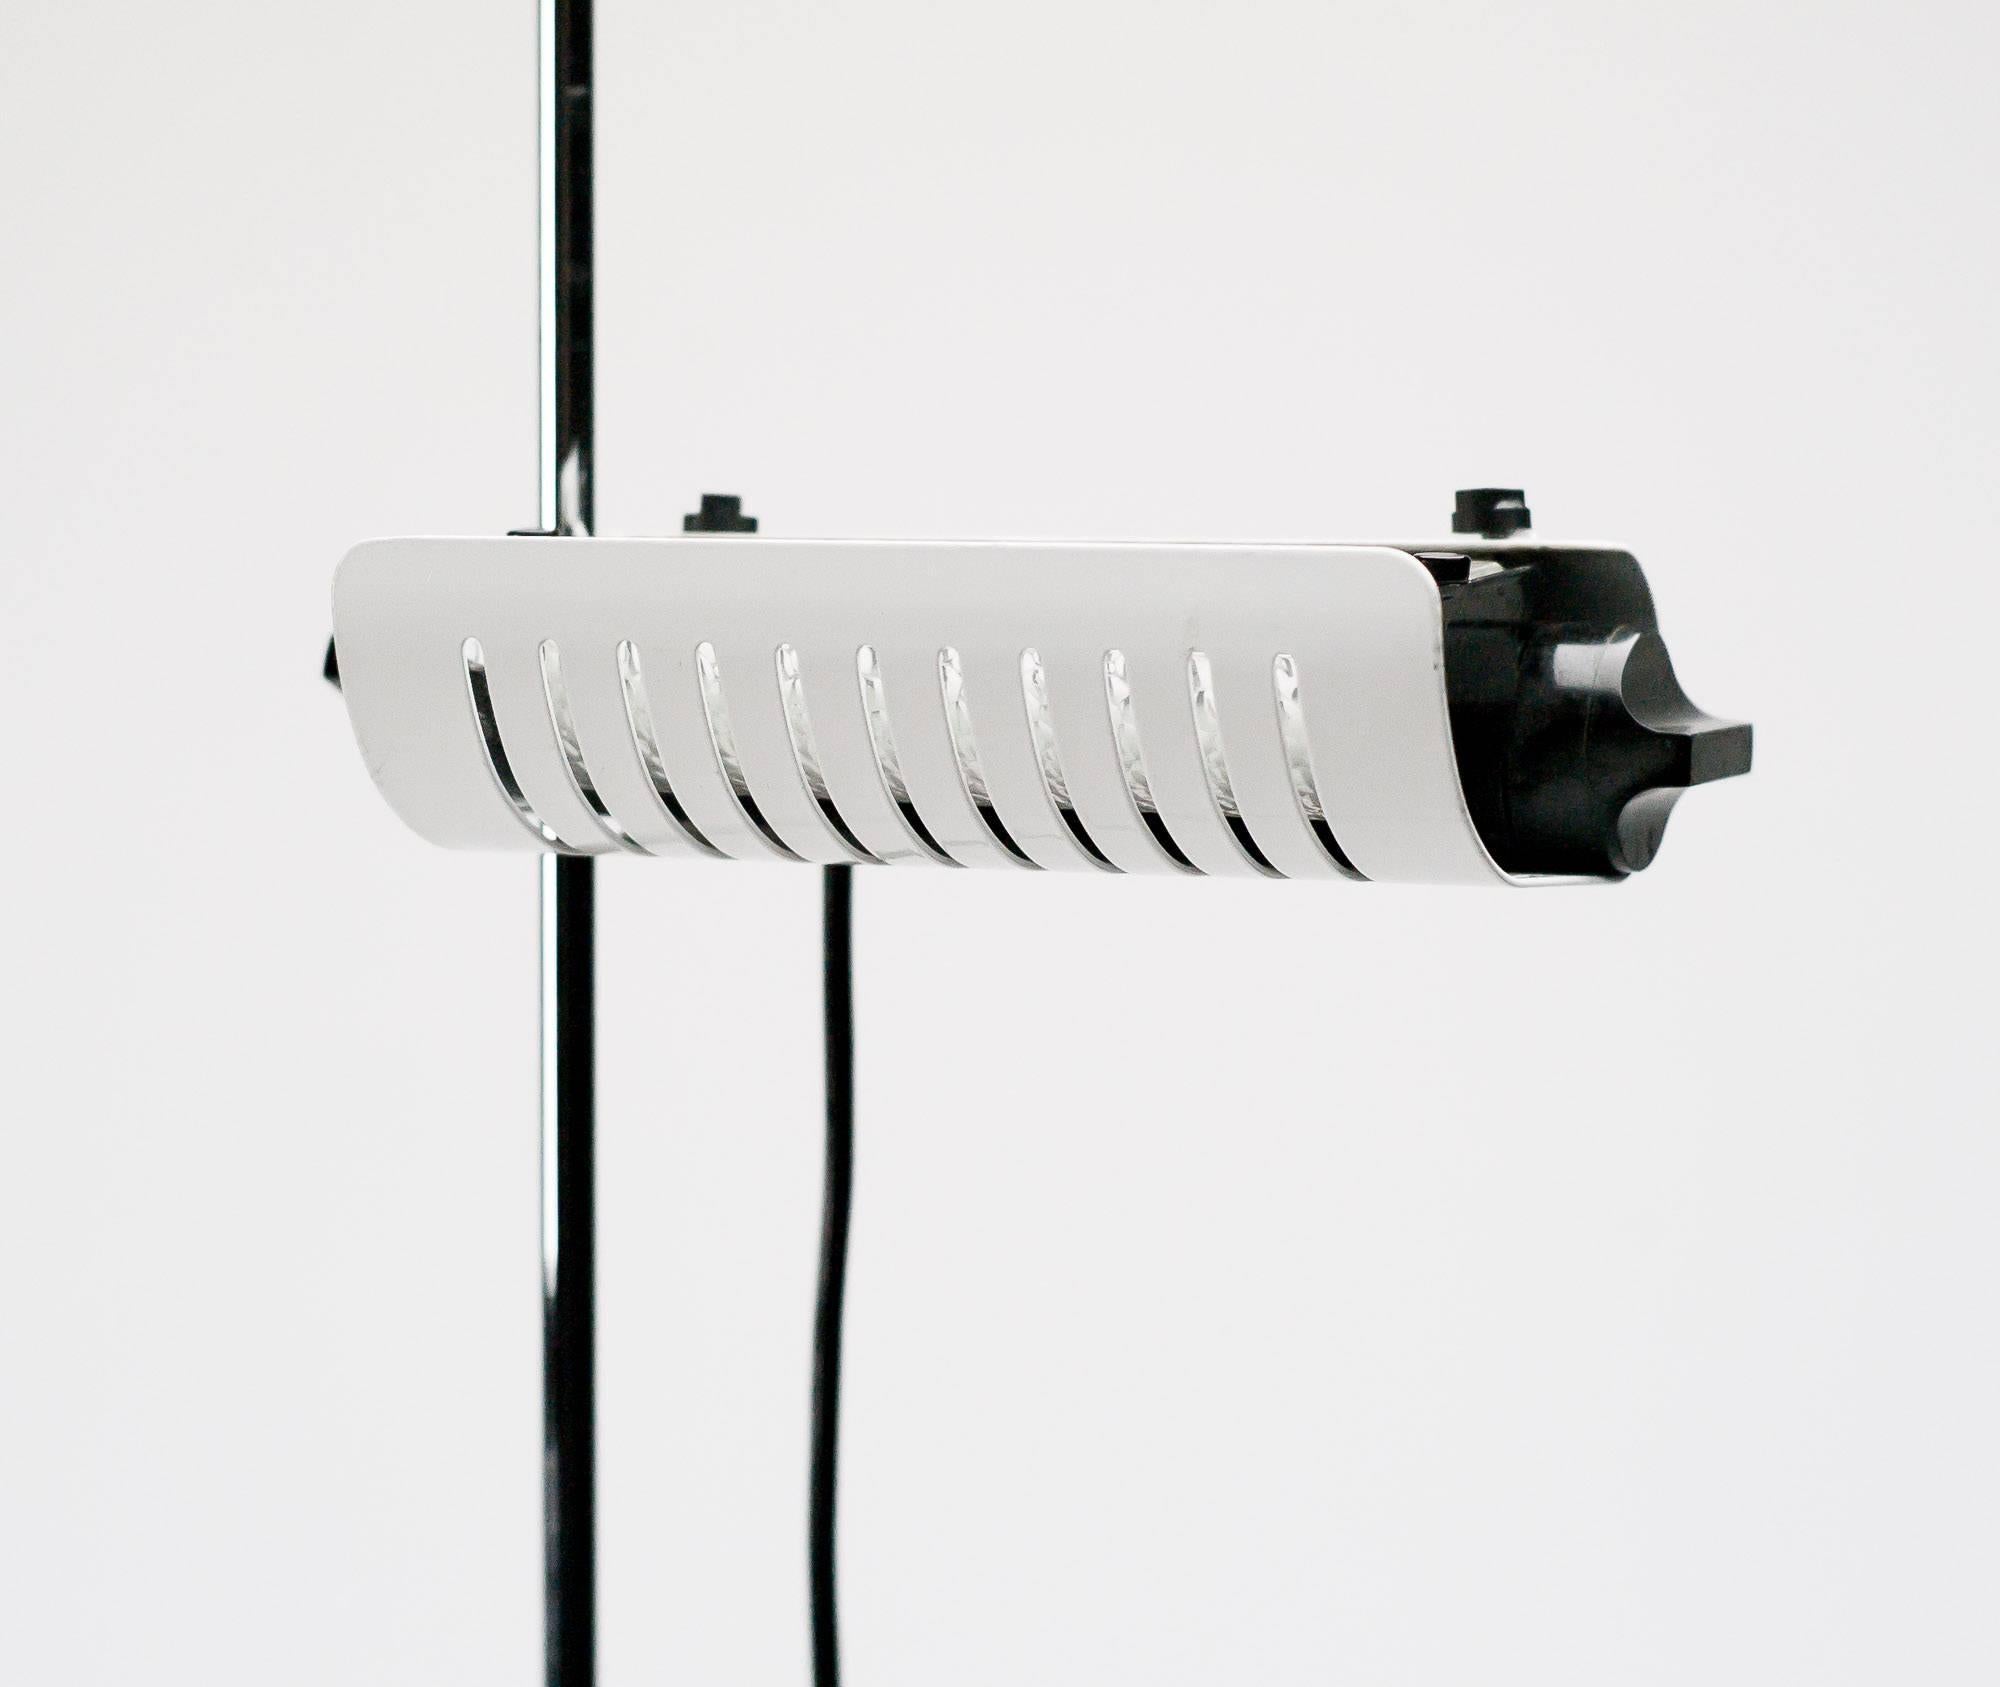 The first domestic lamp designed using halogen light that can be adjusted from very low to very high level.
Base and shade are enameled white steel. The tall stand is made in chrome plated steel.